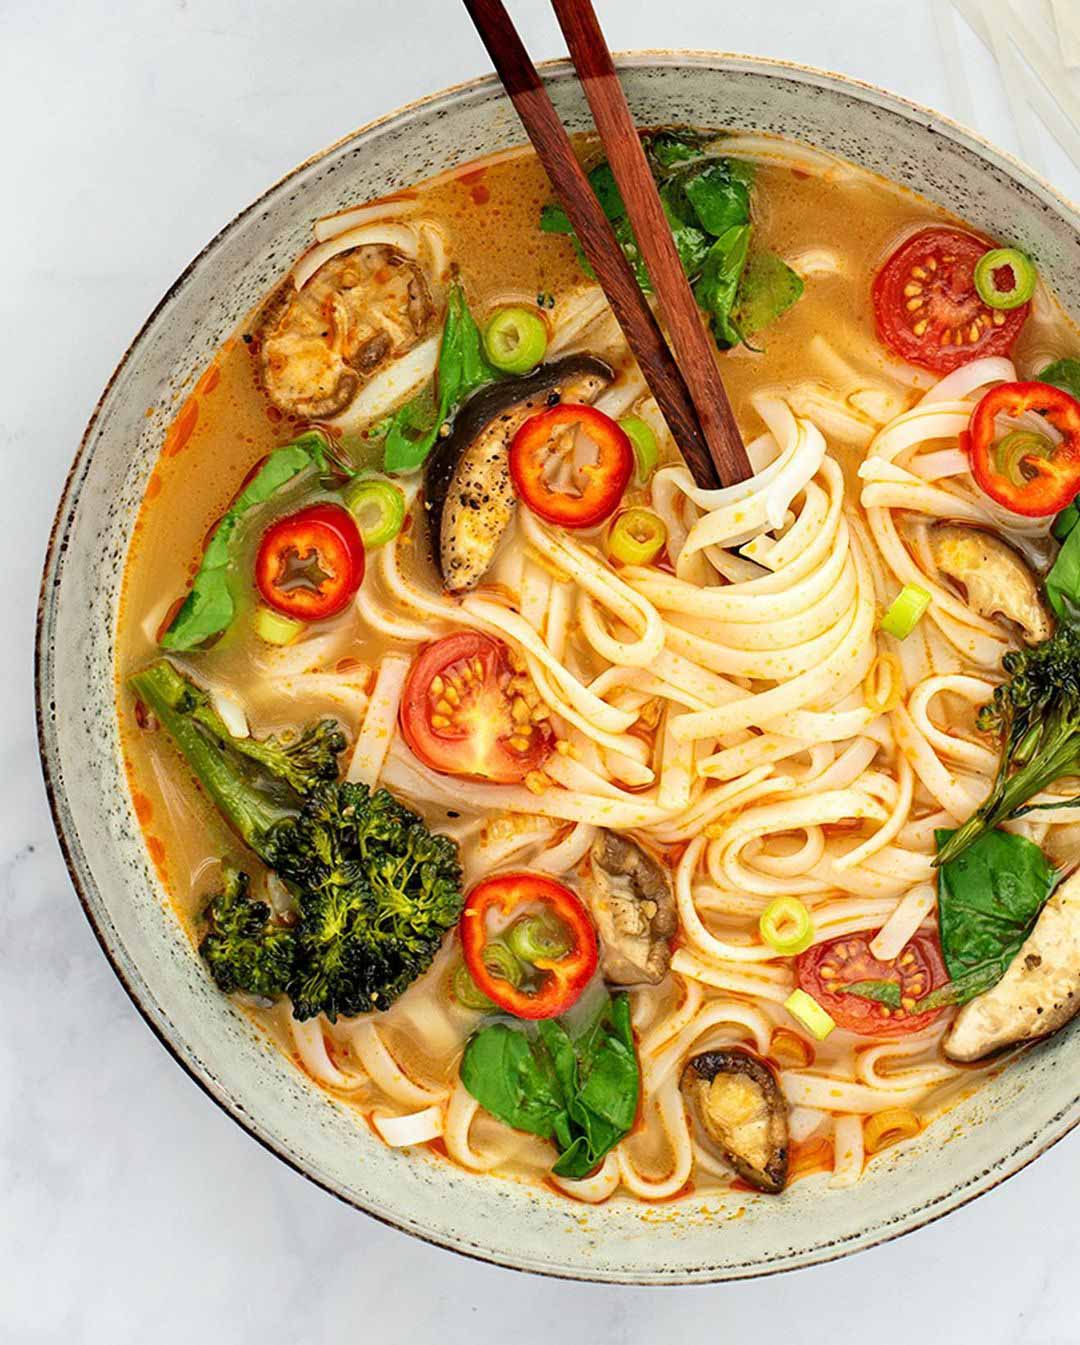 Thai Red Curry Lemongrass Soup recipe served in a bowl with chopsticks.